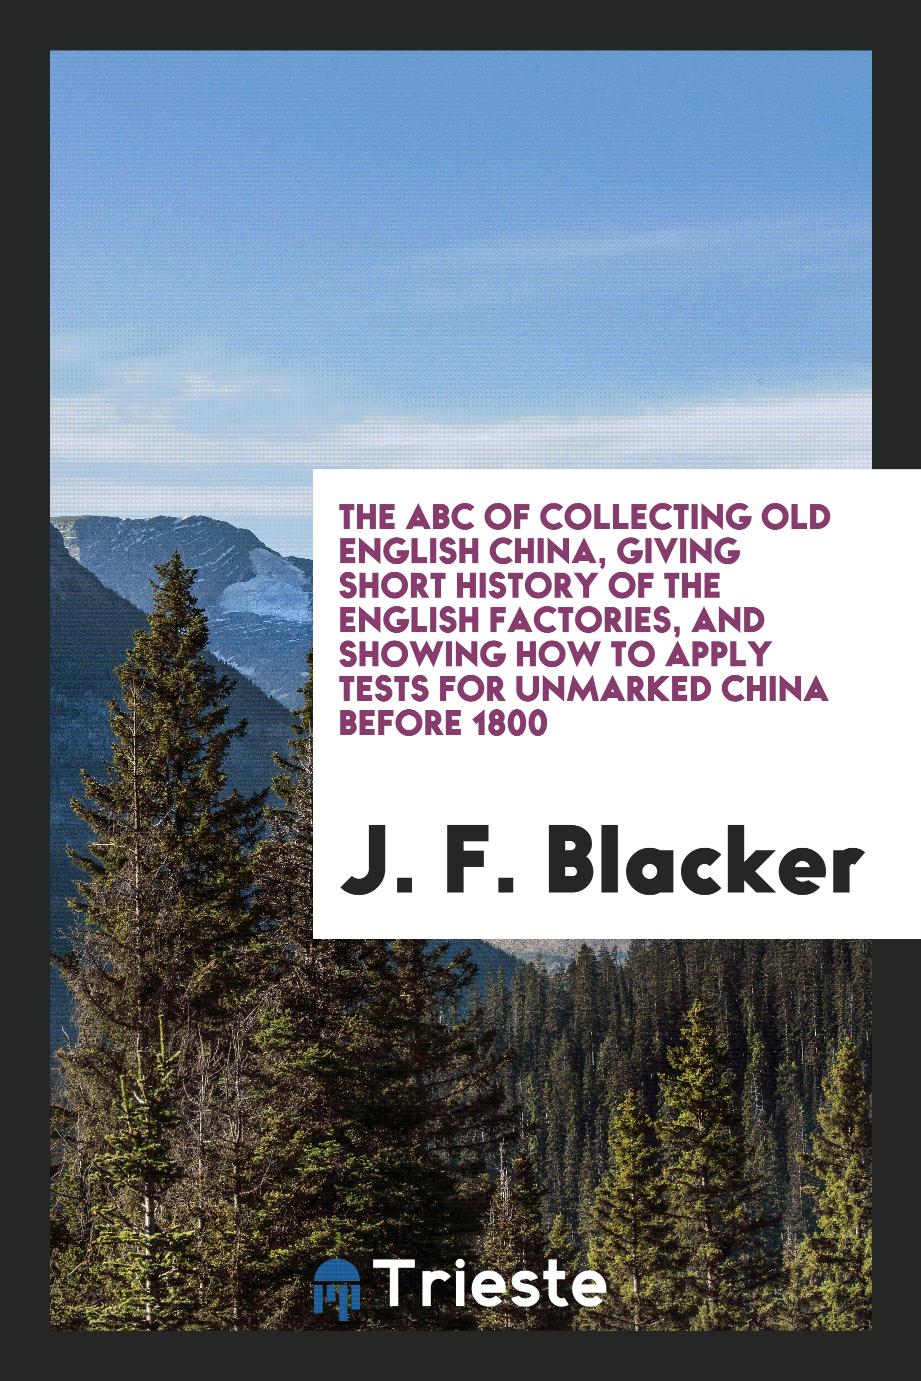 The ABC of Collecting Old English China, Giving Short History of the English Factories, and Showing How to Apply Tests for Unmarked China before 1800